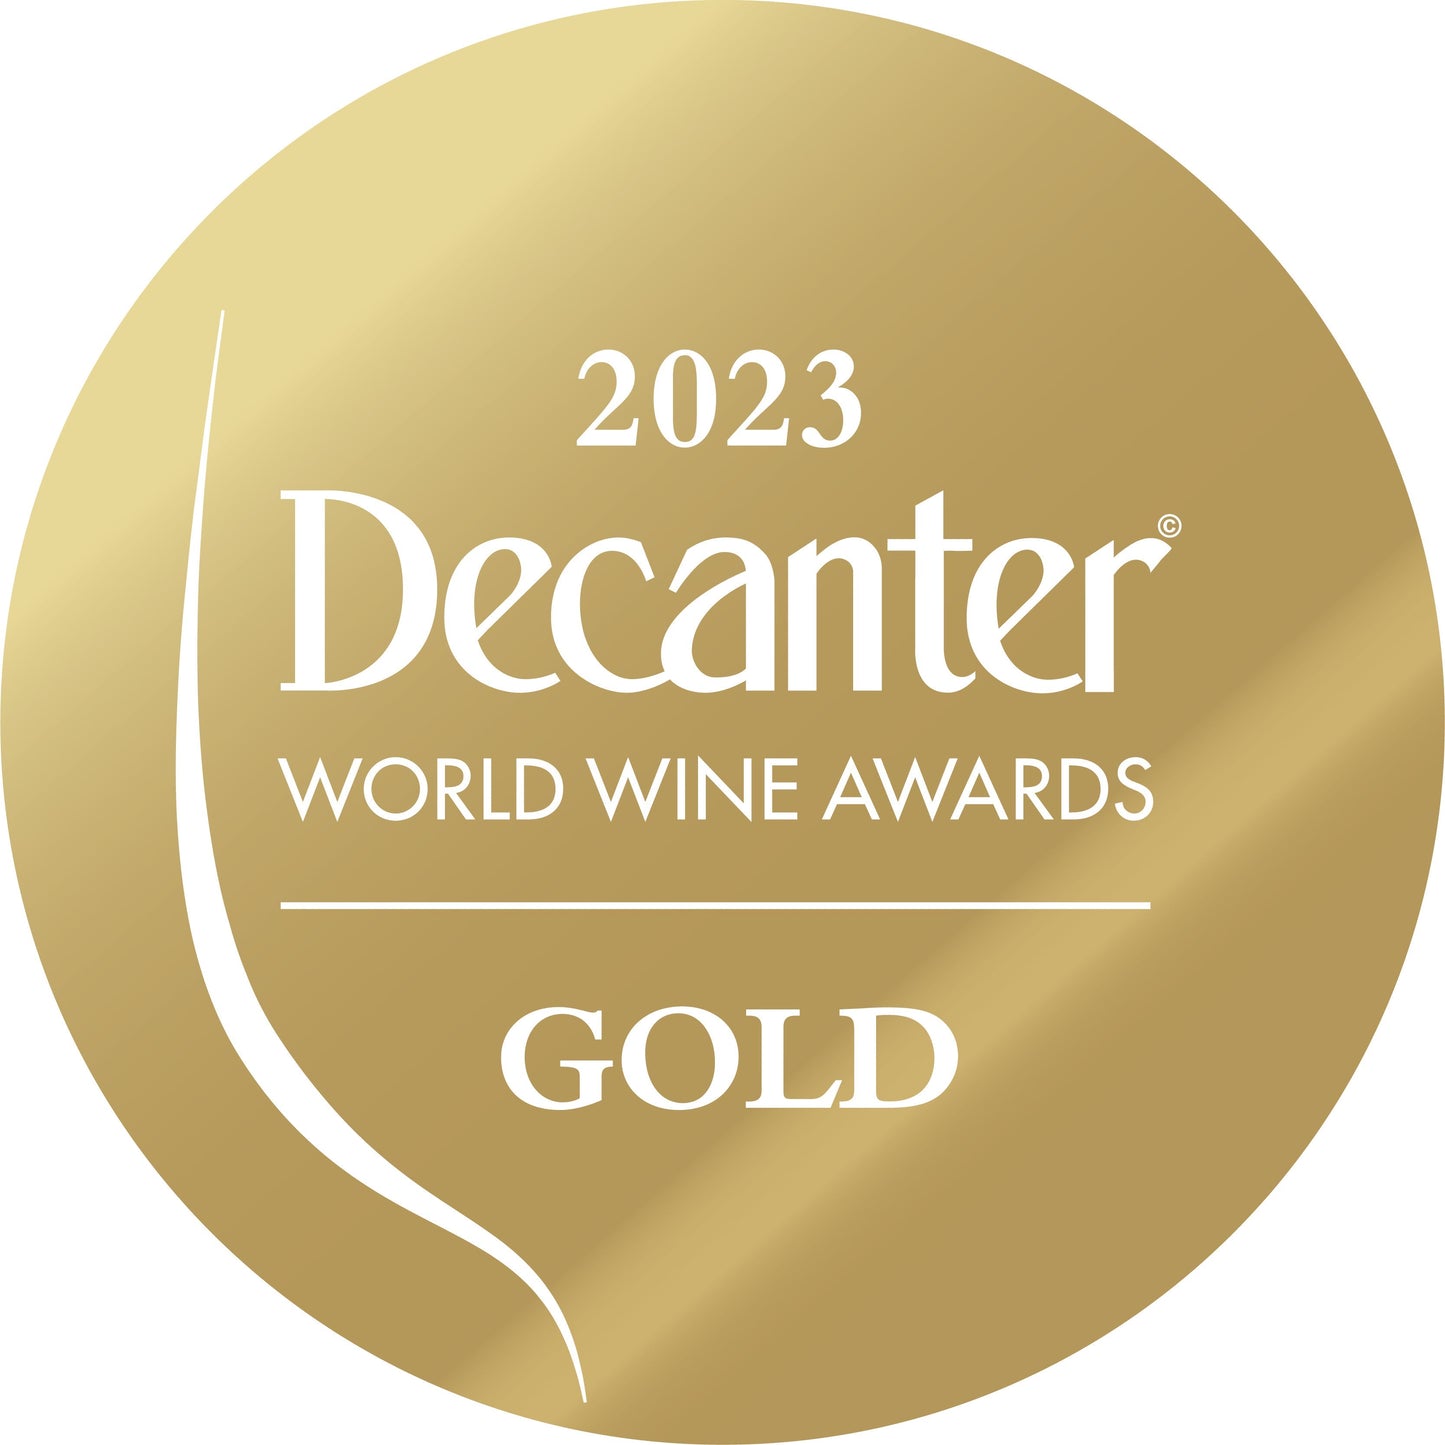 DWWA 2023 Gold GENERIC - Copyright of the medal artwork for 1000 labels